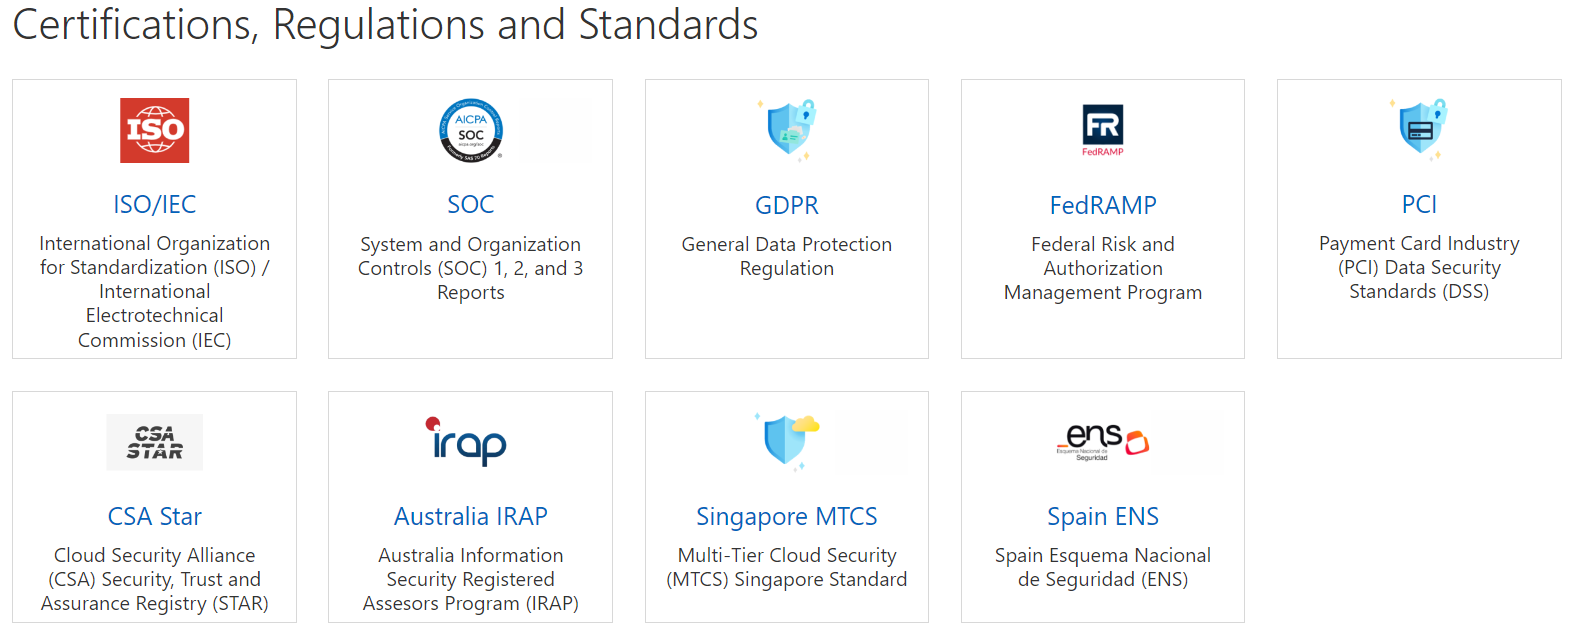 Screenshot of the tiles available in the certifications, regulations, and standards section of the Service Trust Portal home page.